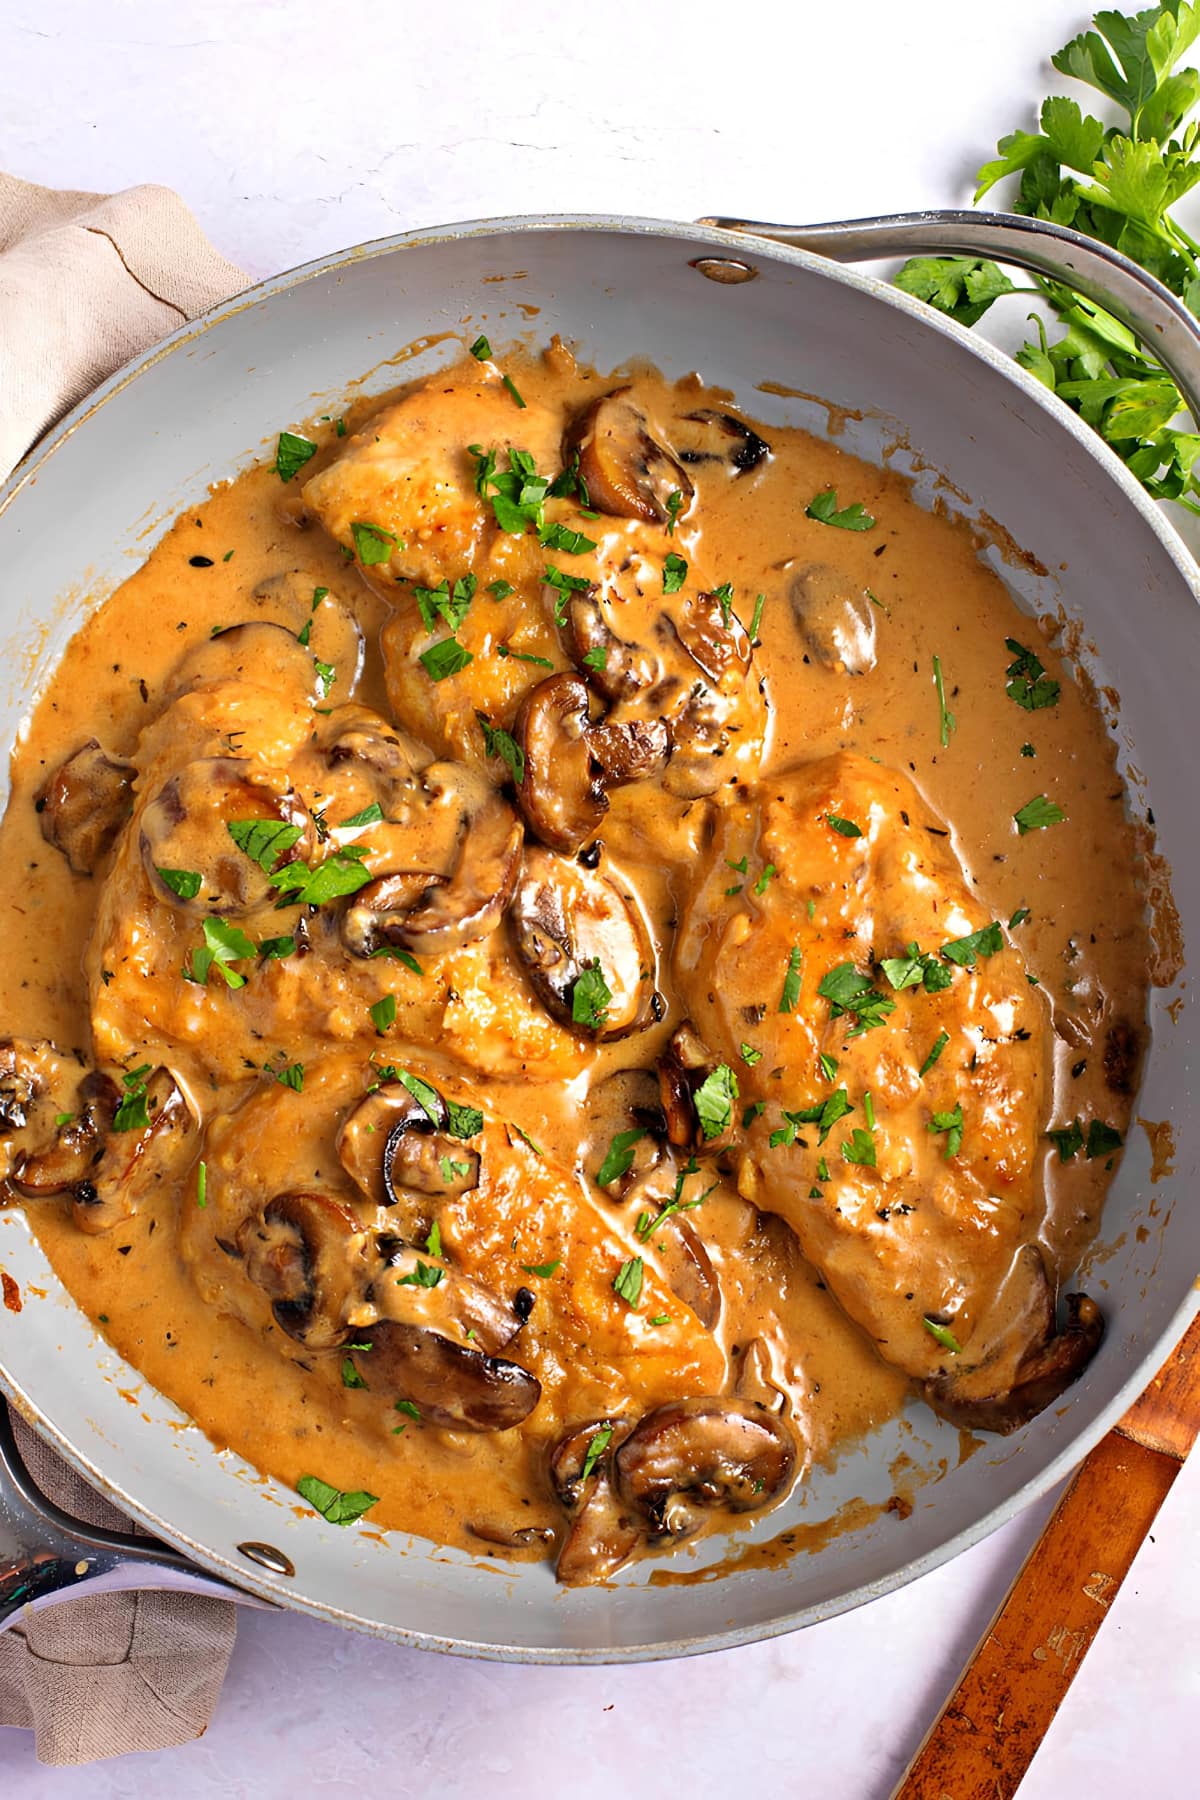 Top view of chicken marsala cooked in a pan garnished with chopped parsley.